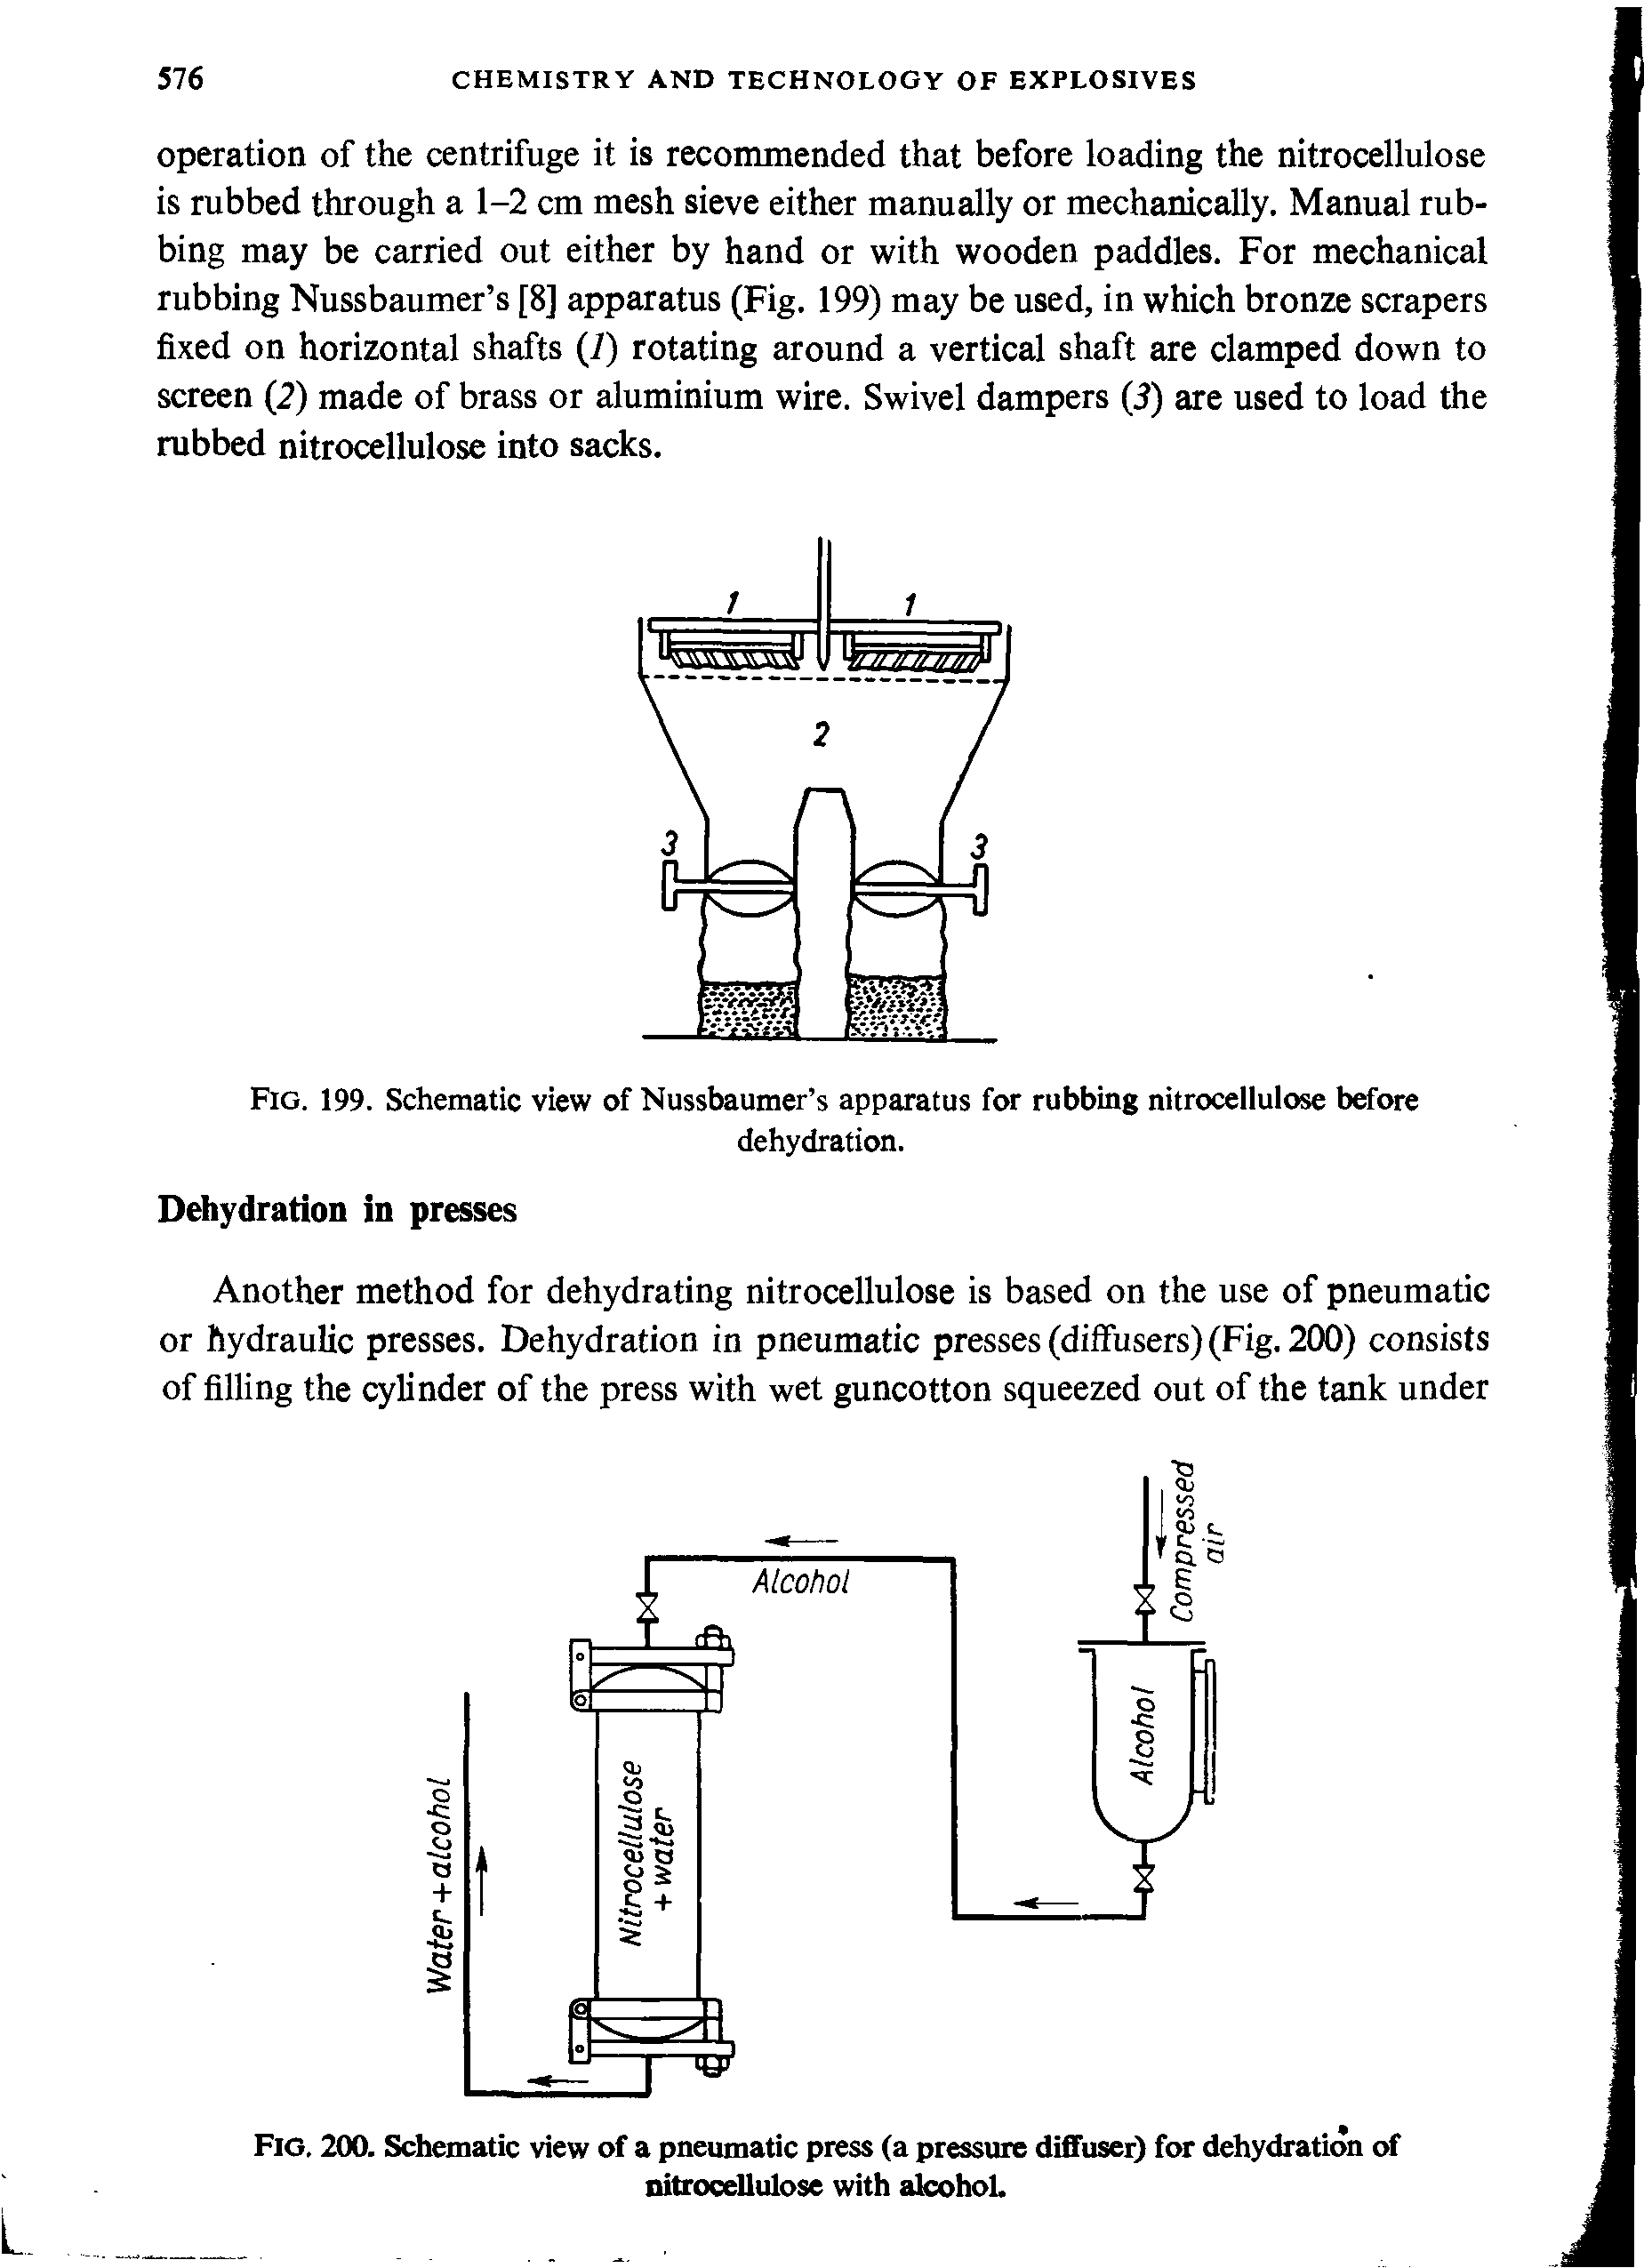 Fig. 200. Schematic view of a pneumatic press (a pressure diffuser) for dehydration of nitrocellulose with alcohol.